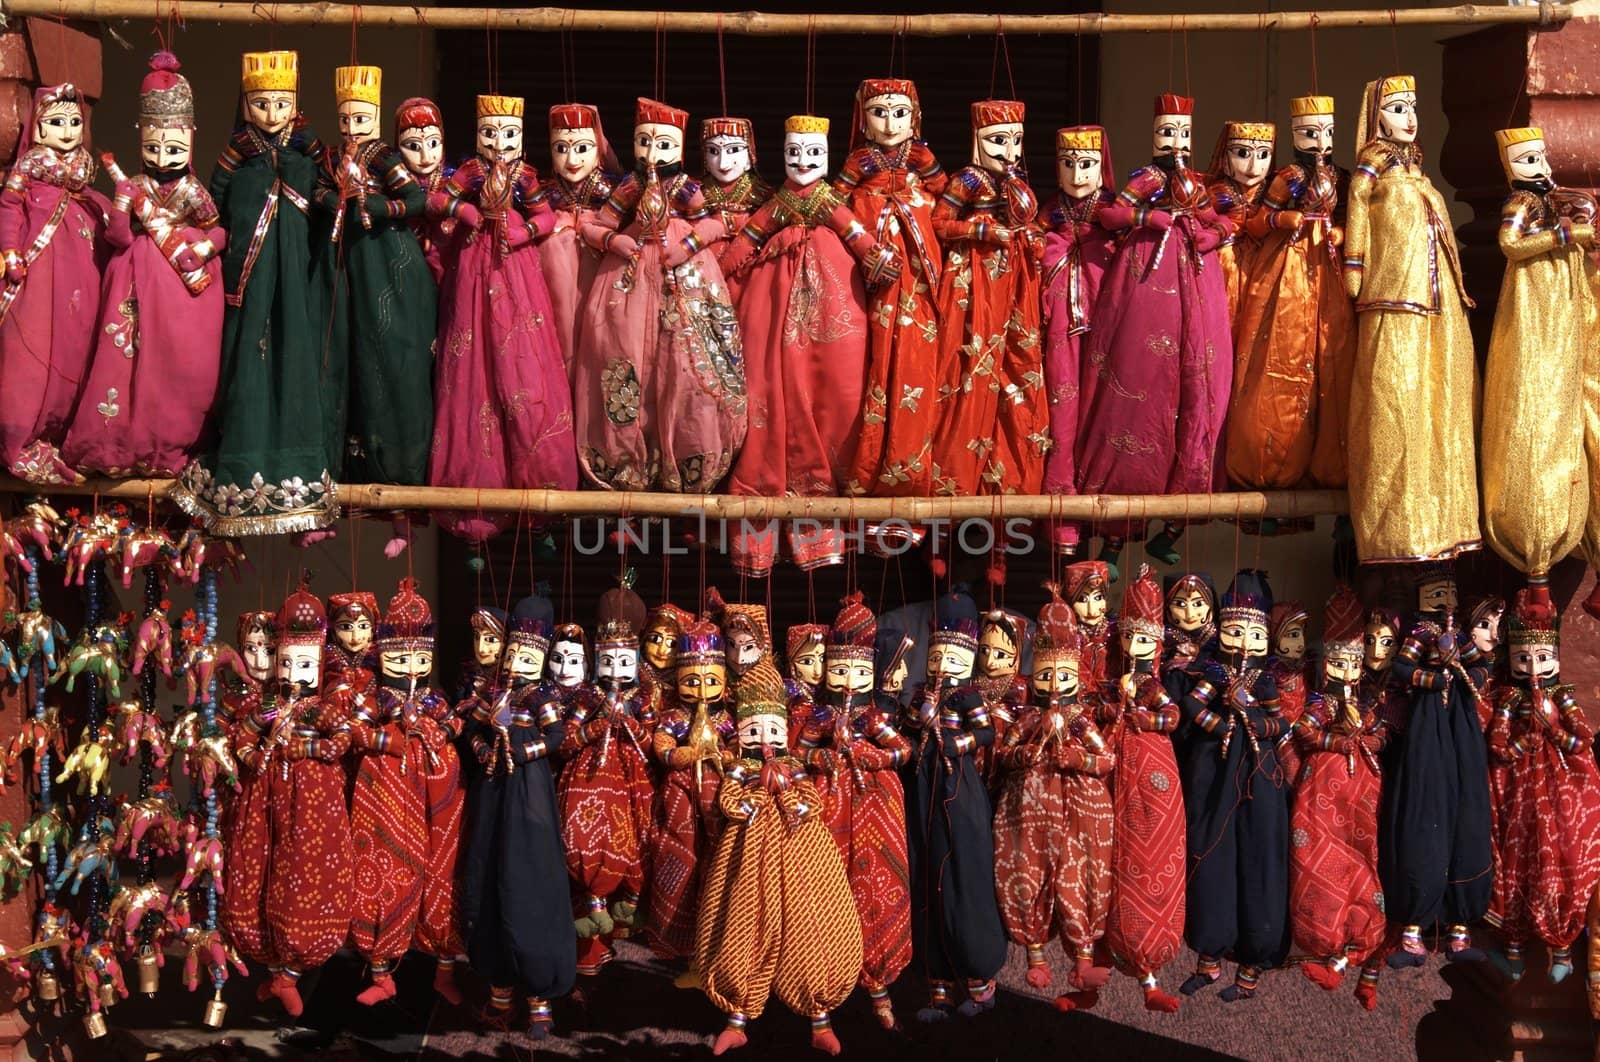 Rows of colorful puppets for sale in Jaipur, Rajasthan, India